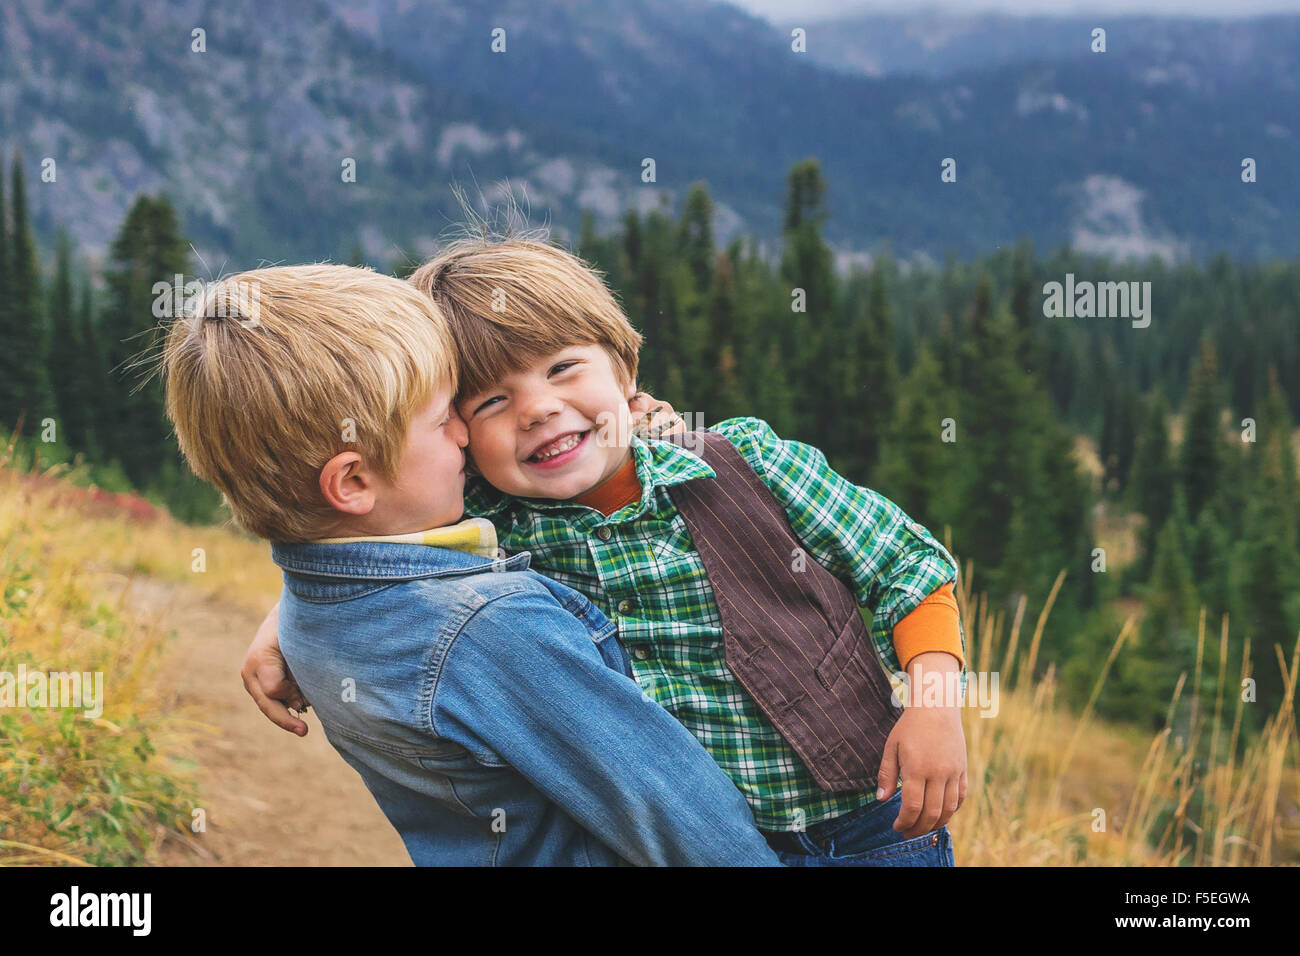 Two smiling boys messing about Stock Photo